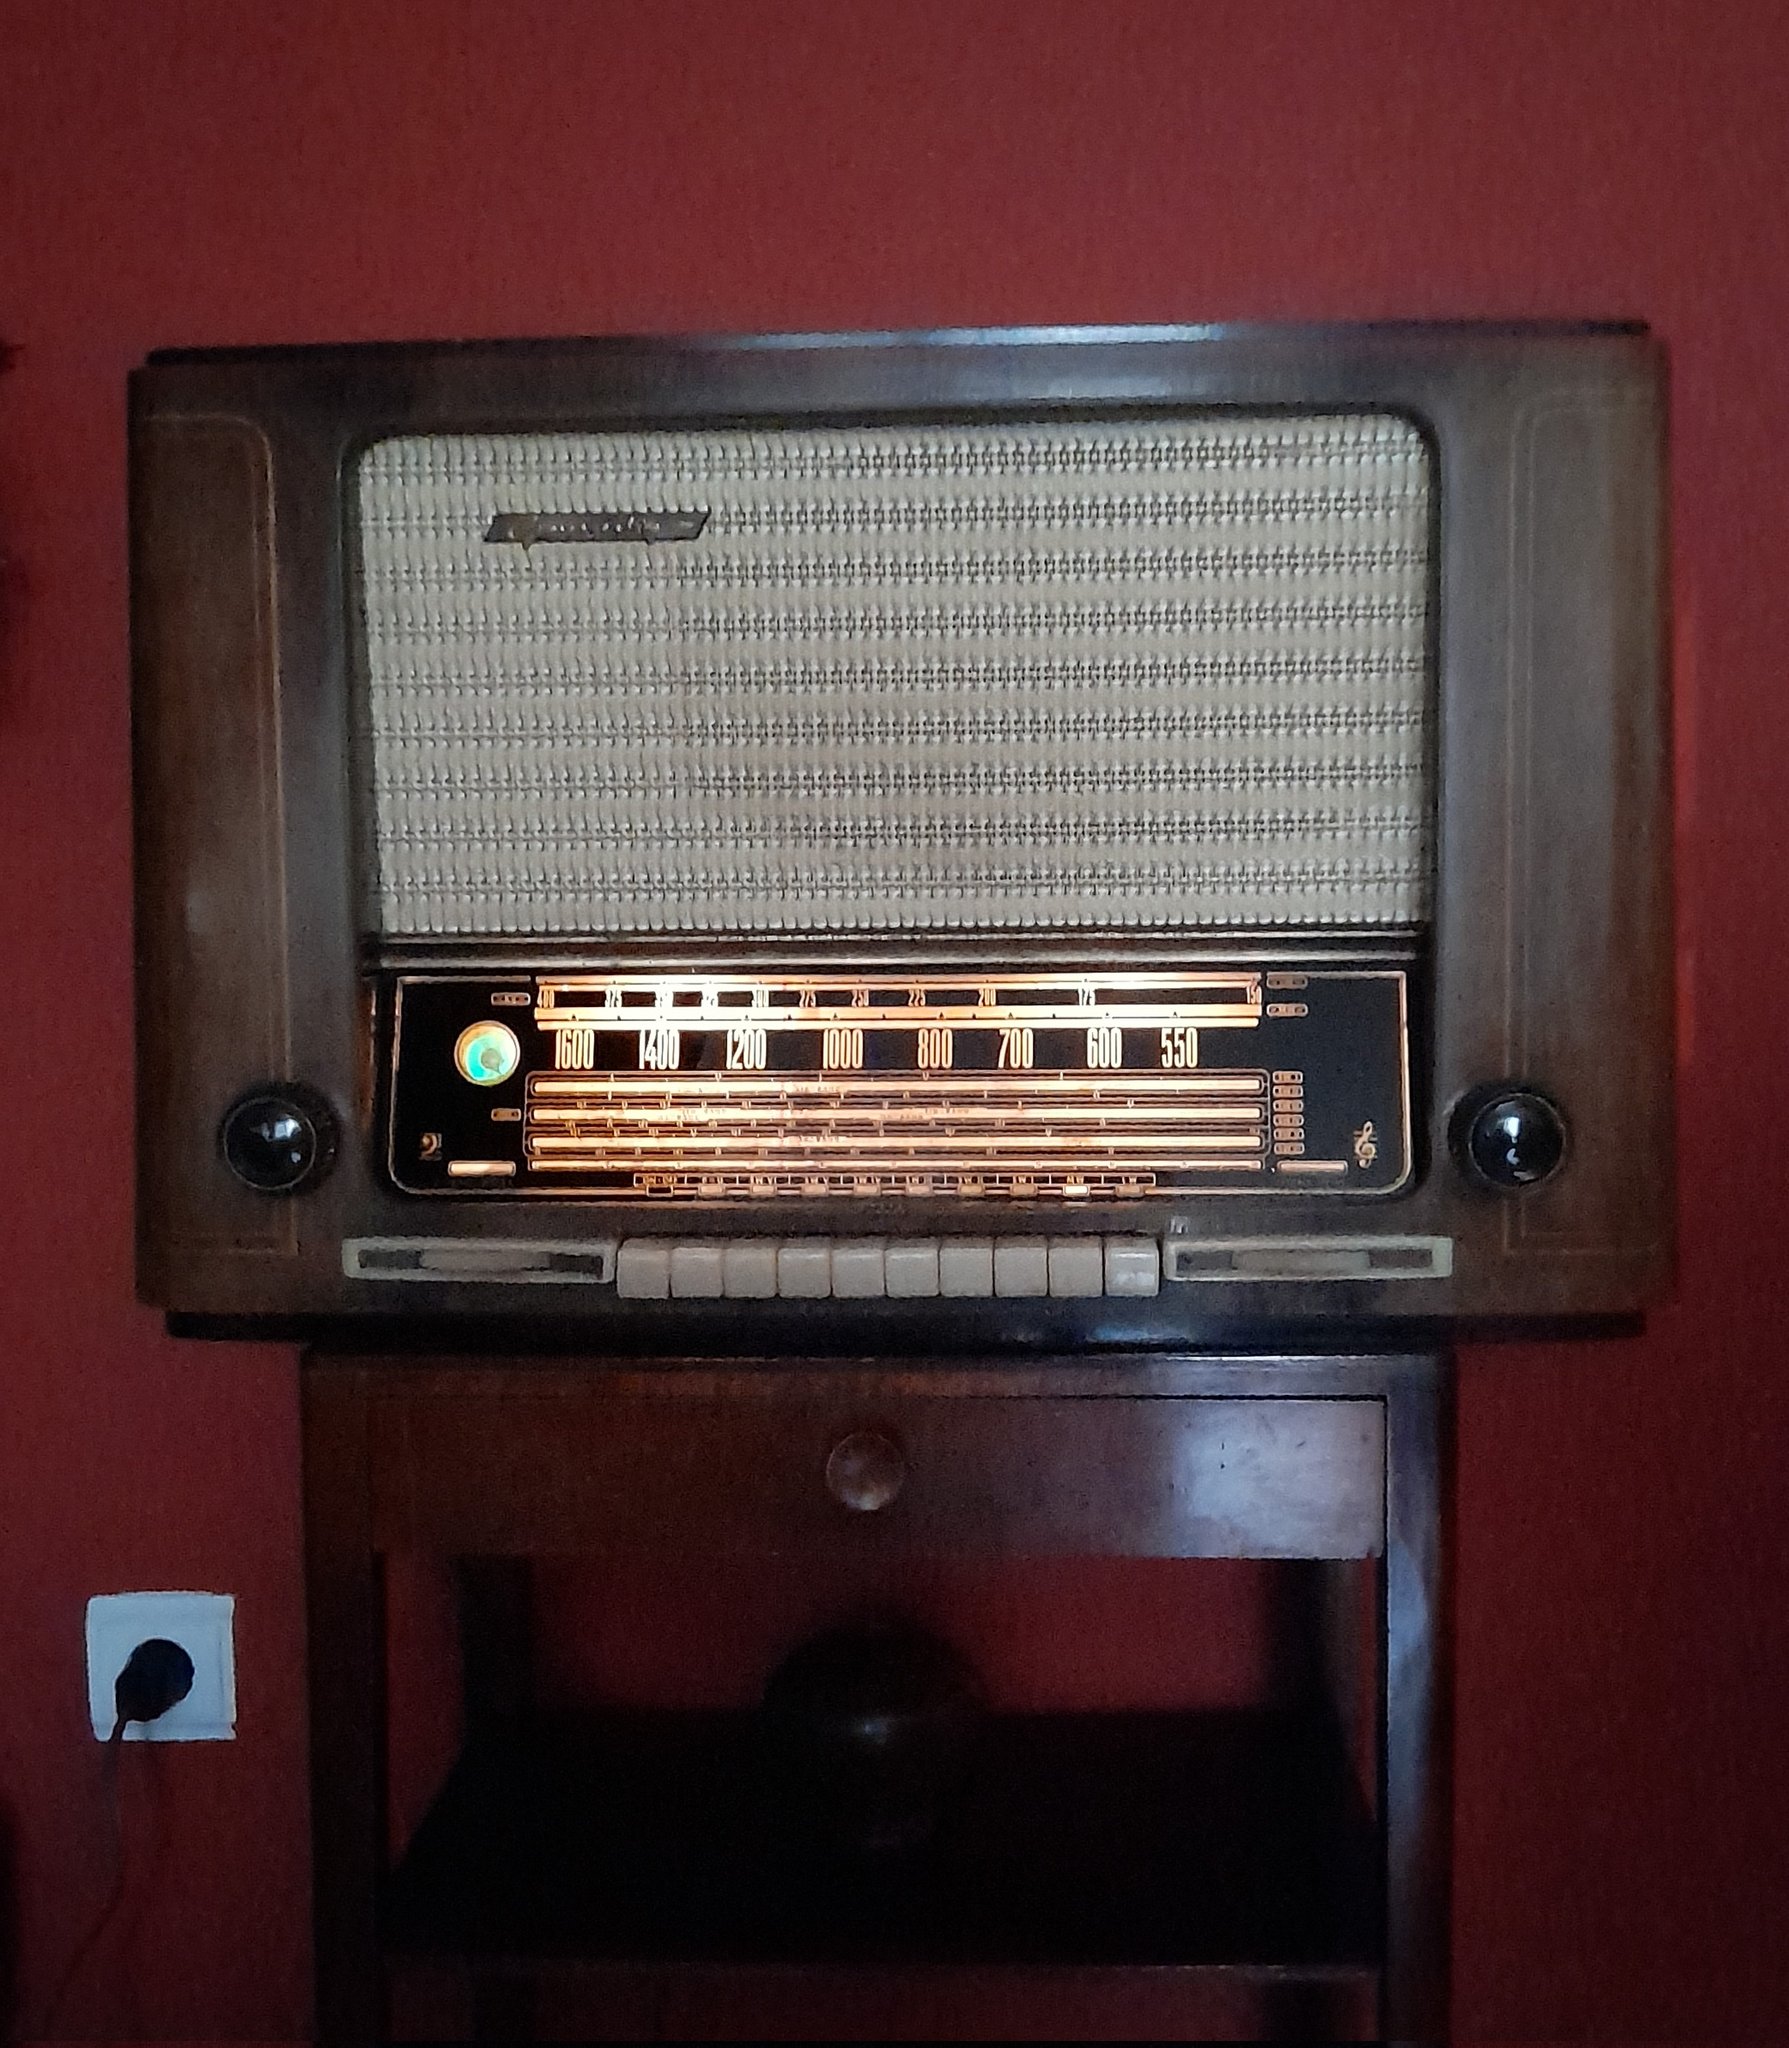 Sílvia Correia on X: "Happy Monday! As we celebrate #WorldRadioDay today,  I'm sharing a radio I inherited from my grandfather. It's a 1950's #Grundig  Exportsuper 5045W tube radio. Still works, but needs